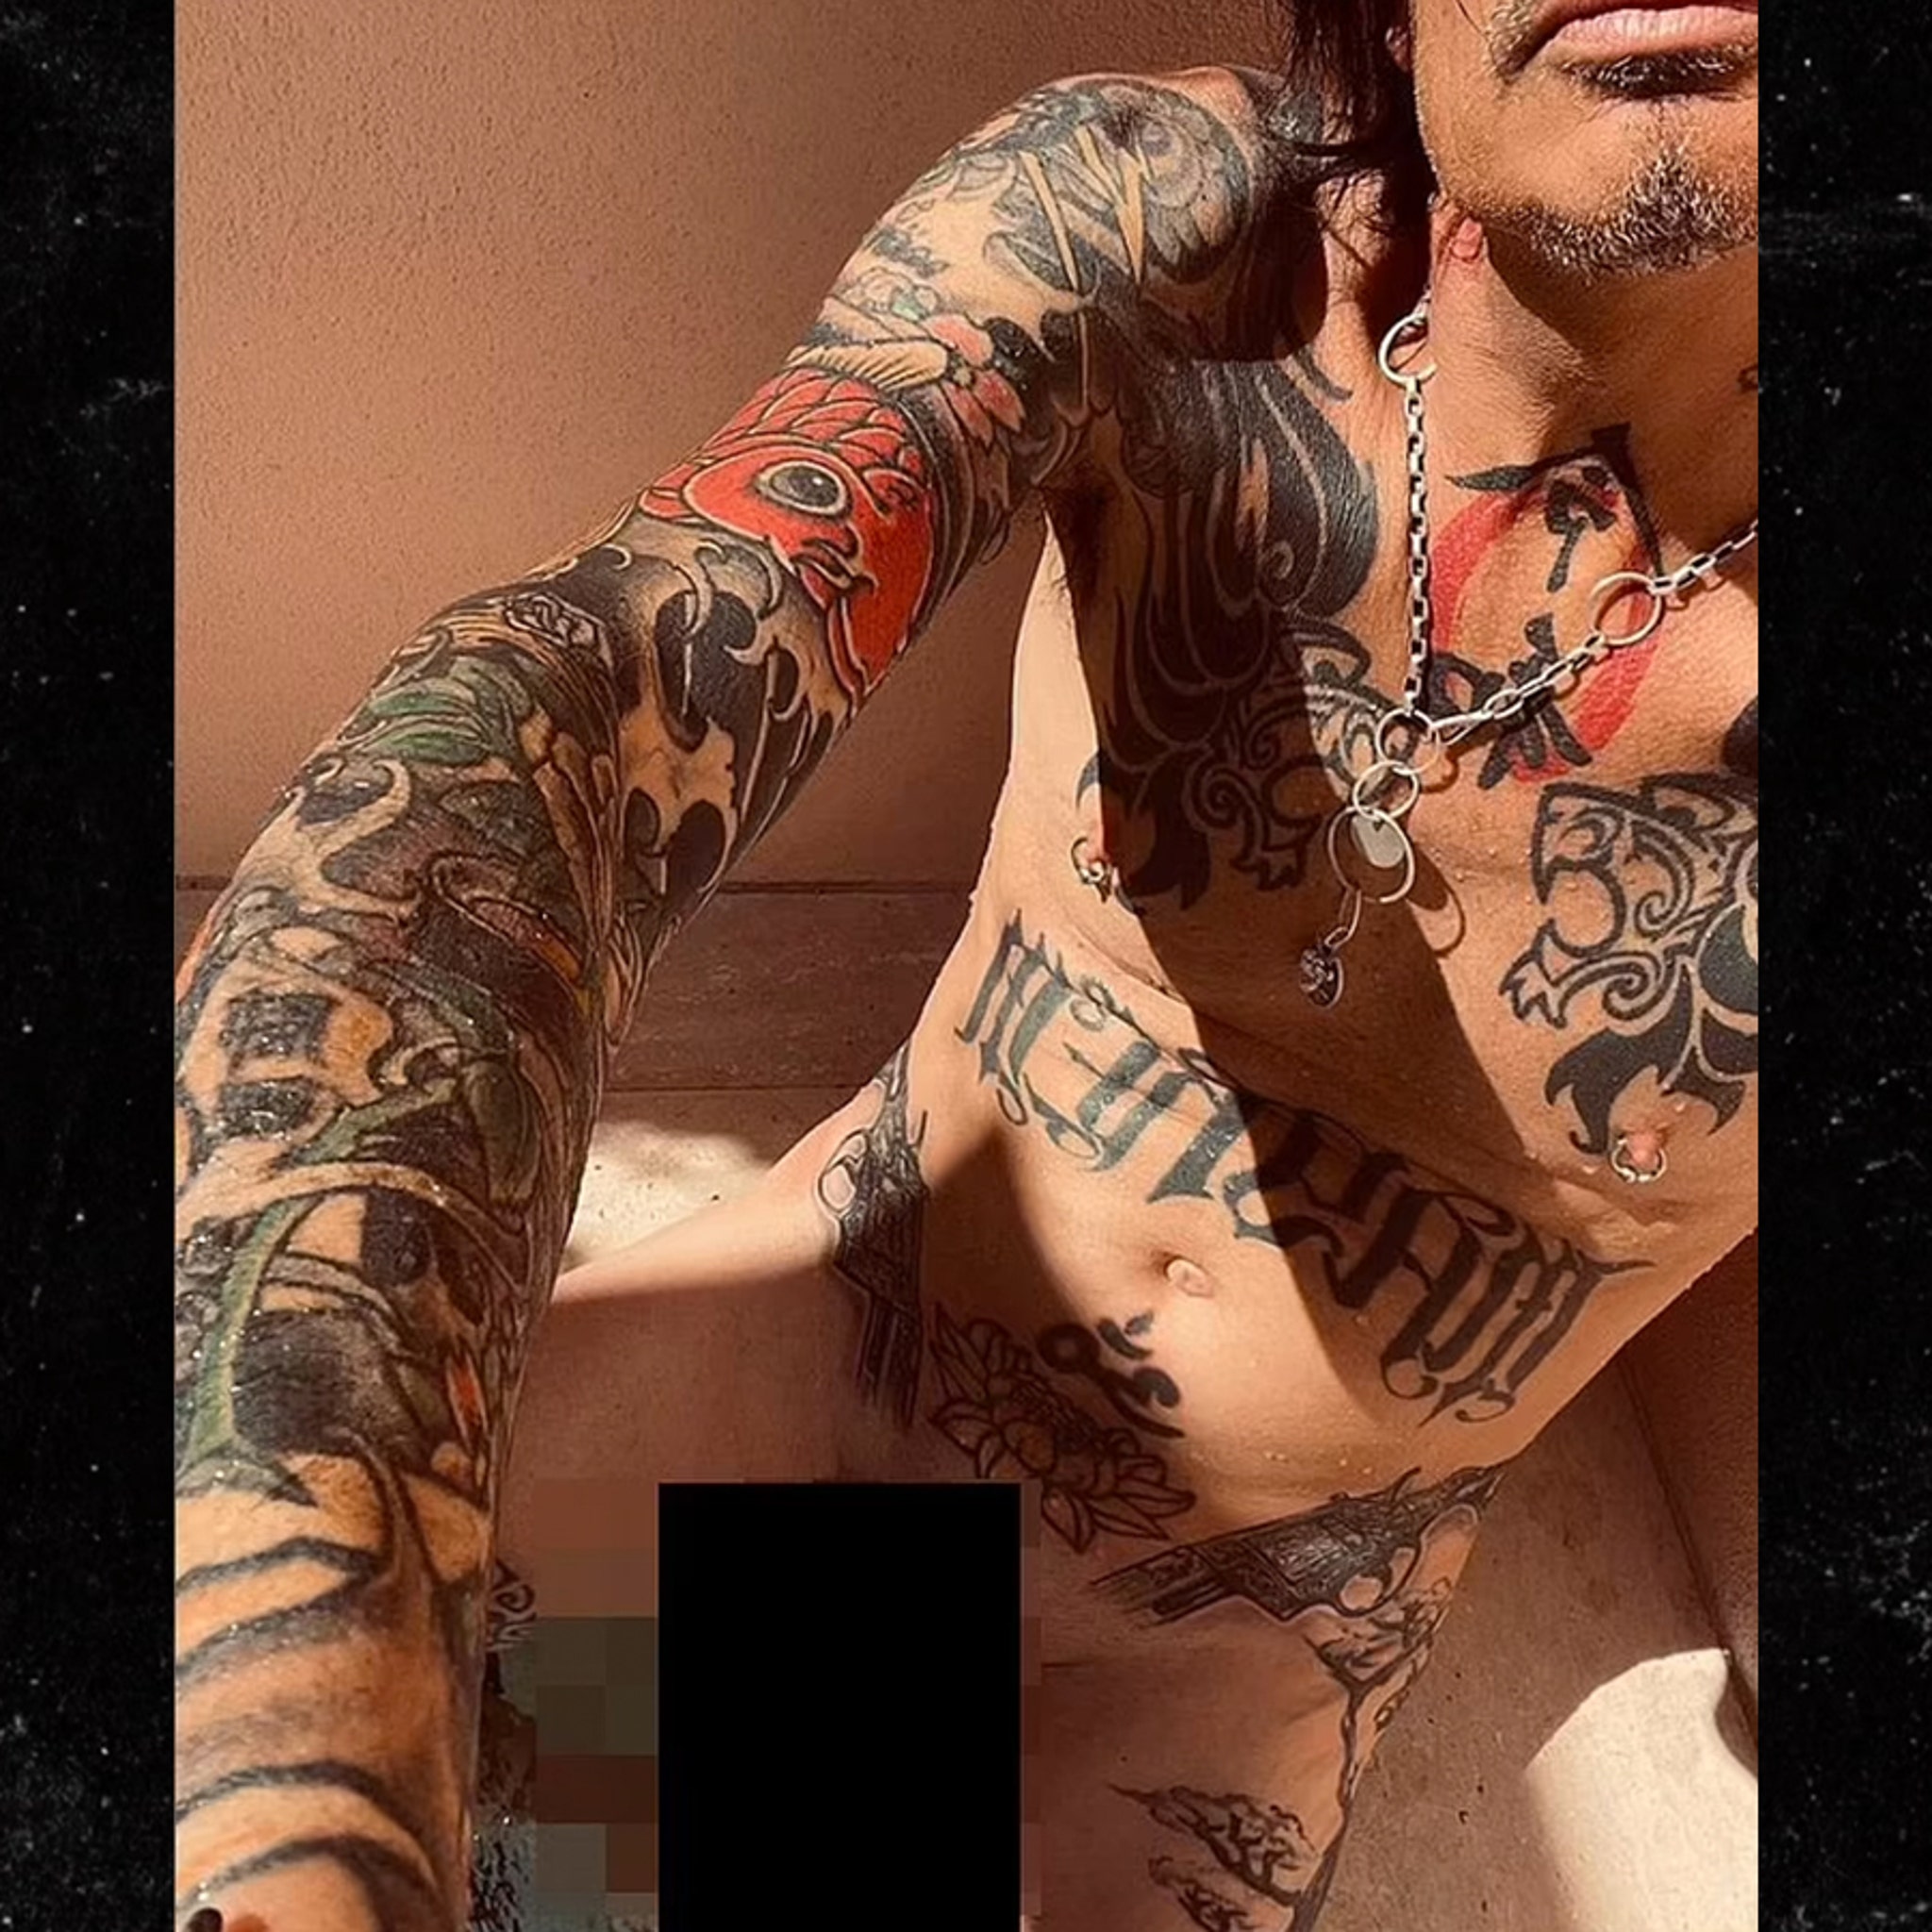 Total 34+ imagen tommy lee full frontal.photo